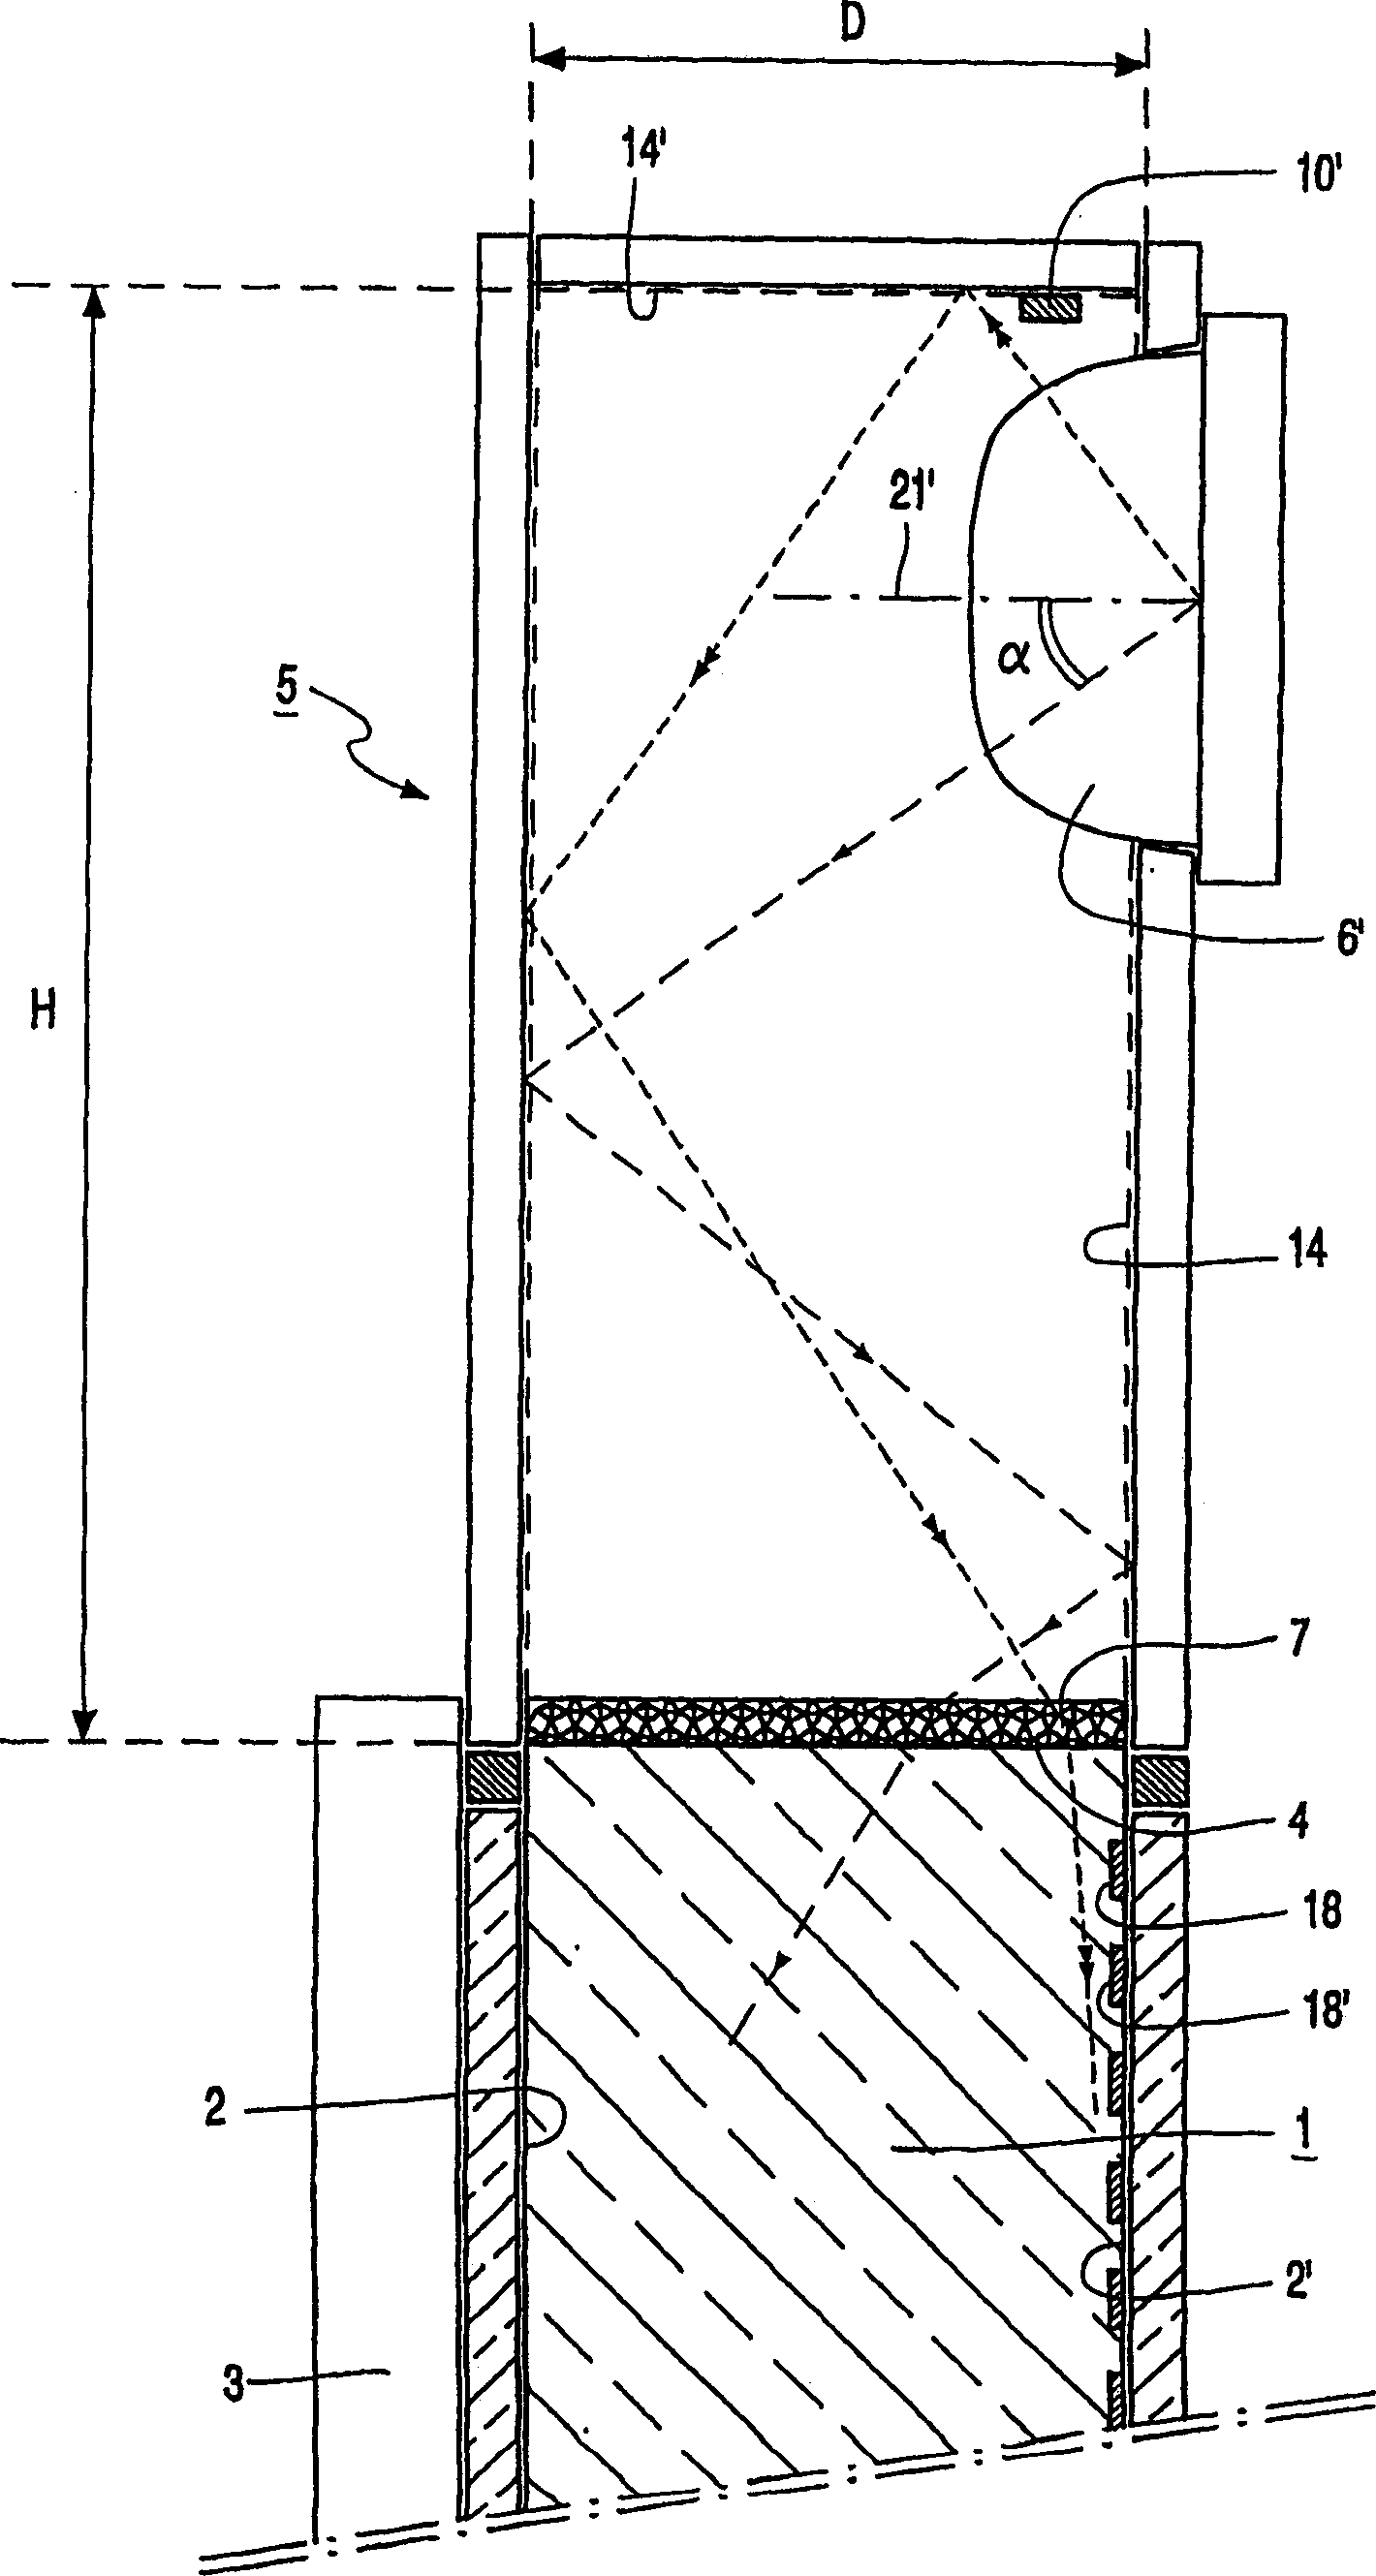 Illumination system, light mixing chamber and dispaly device